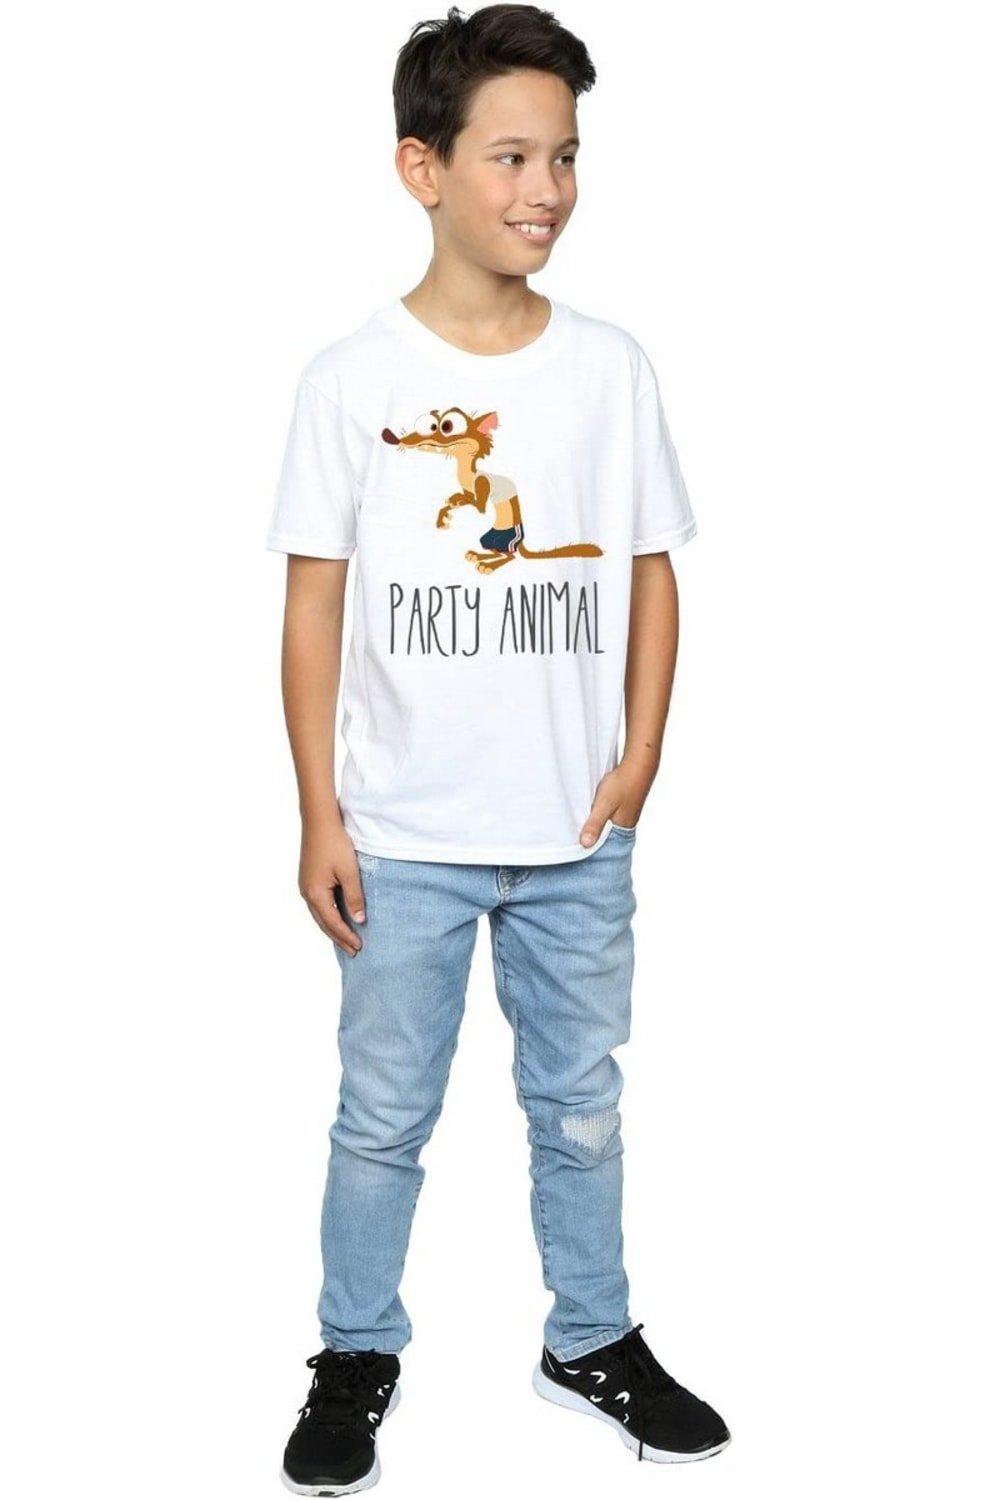 Party Animal Cotton T-Shirt